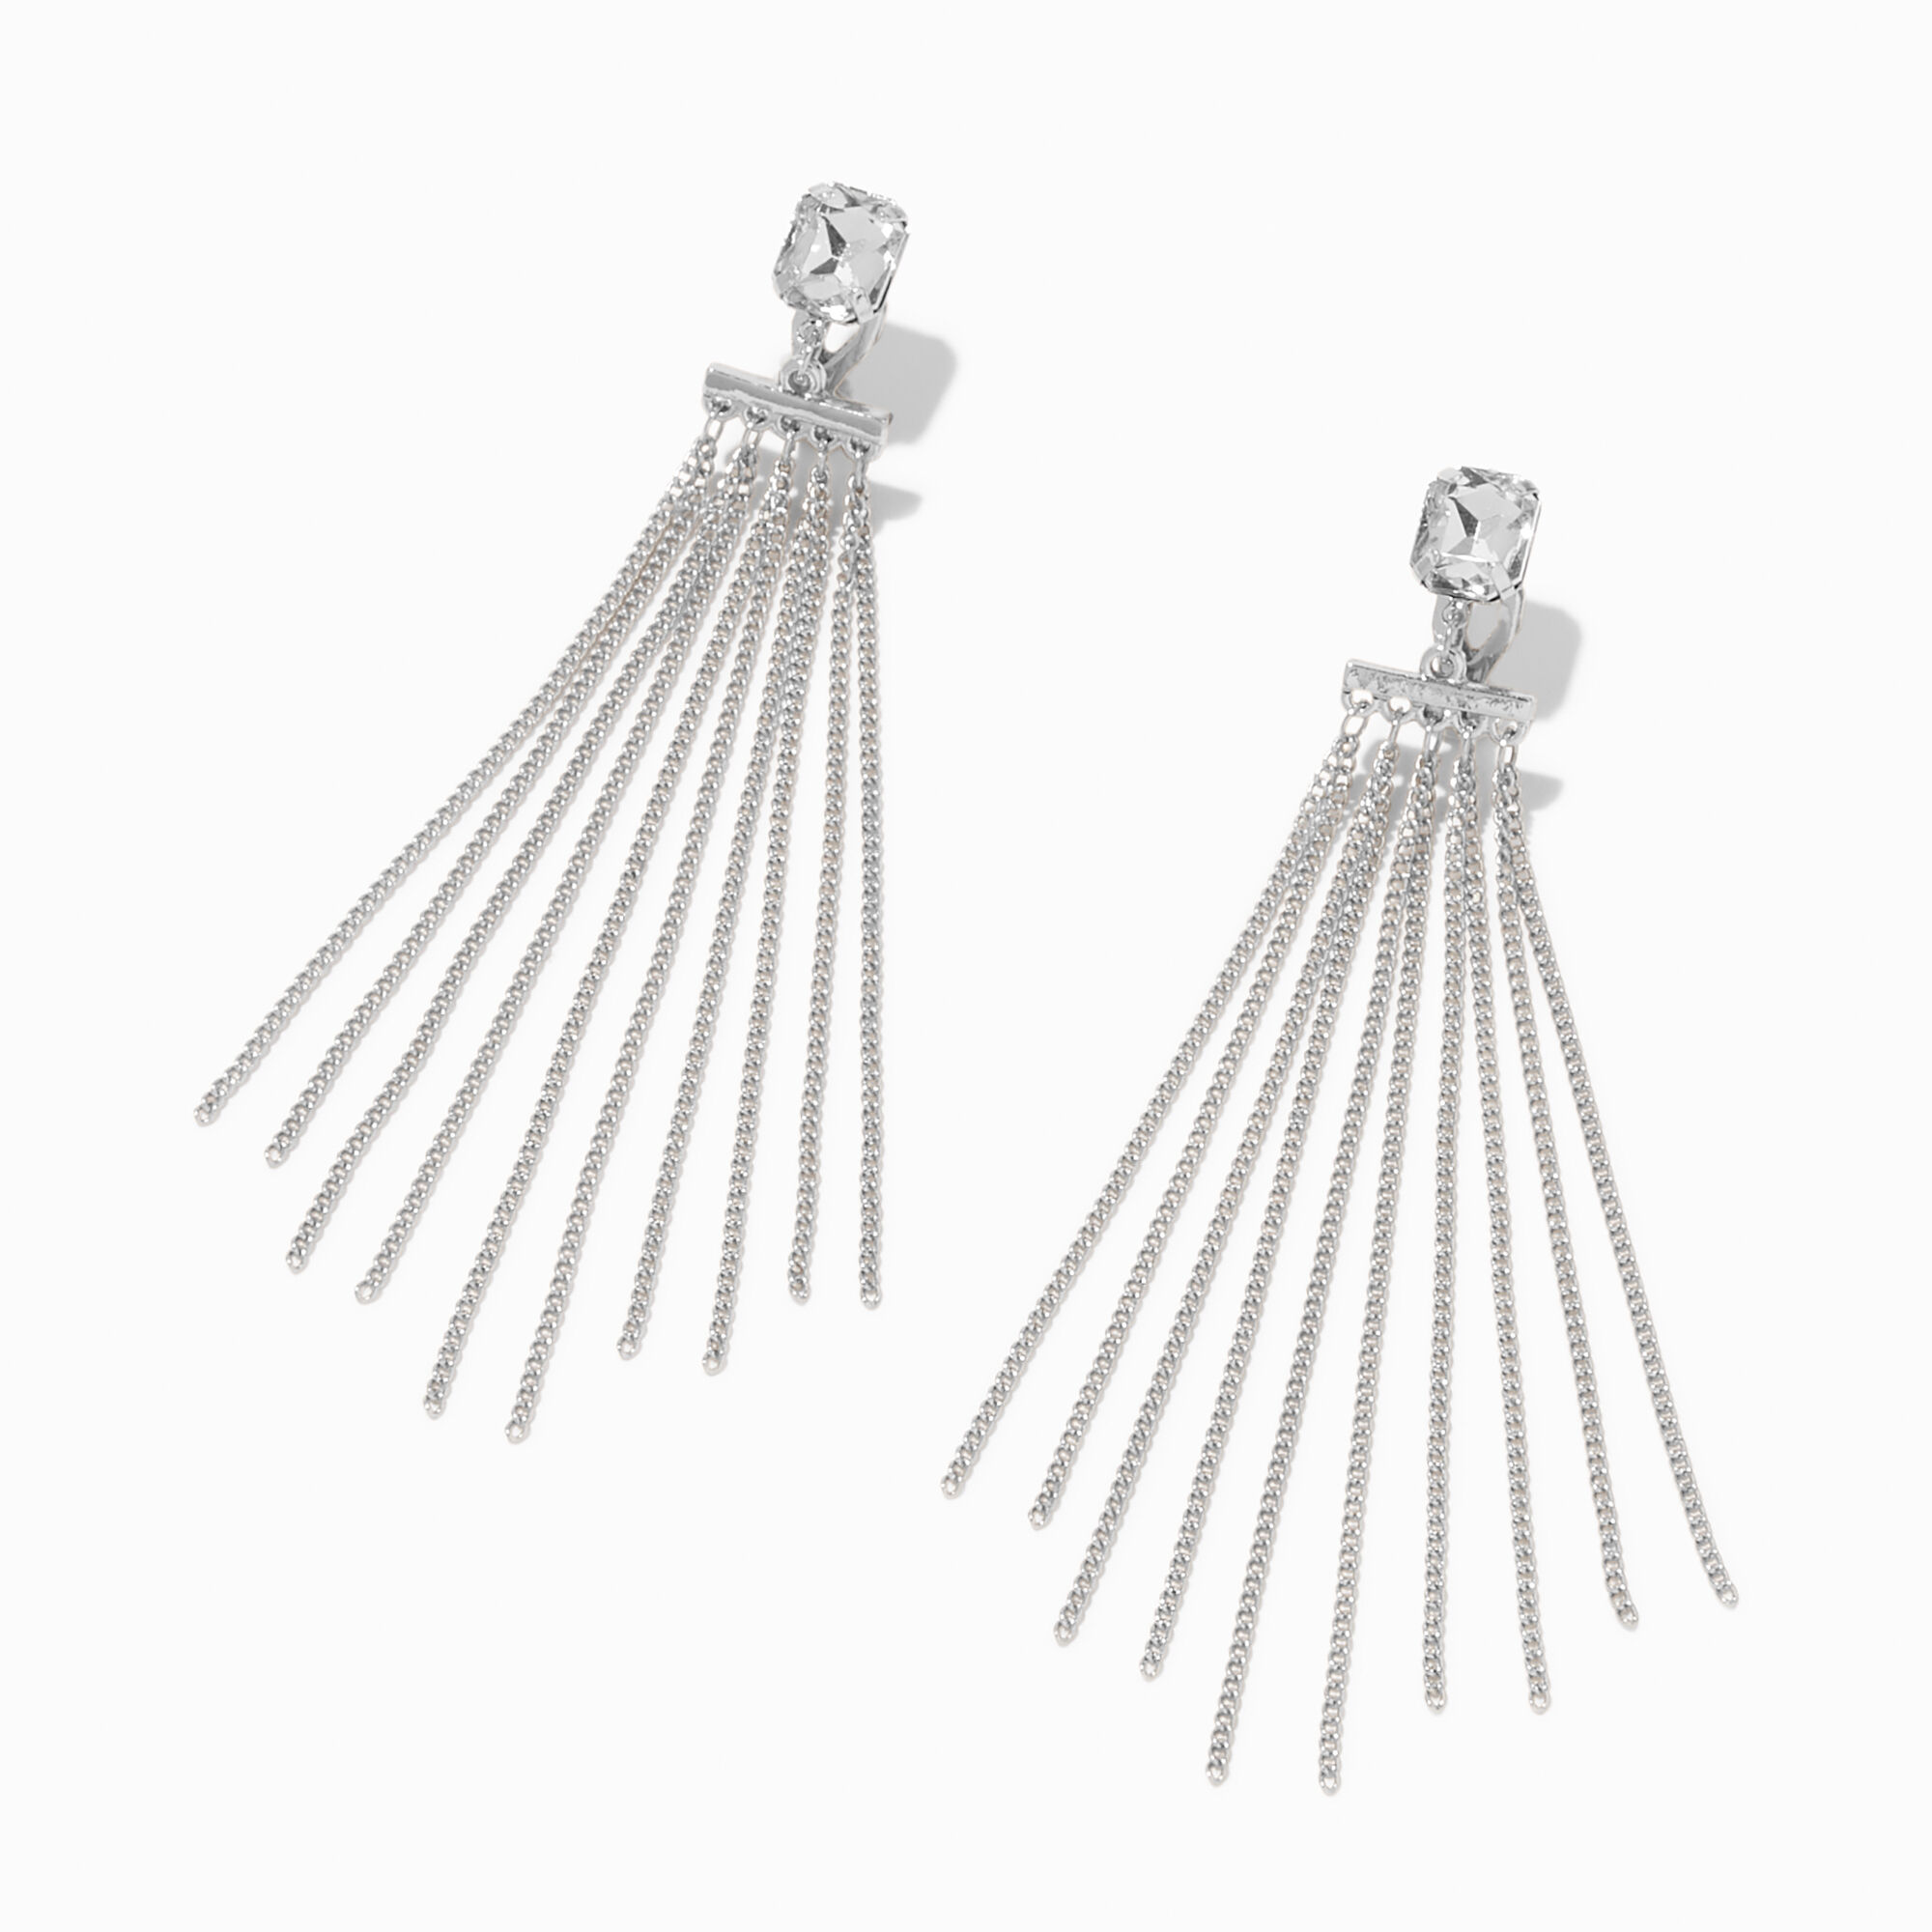 View Claires Tone 3 Crystal Chain Fringe ClipOn Drop Earrings Silver information